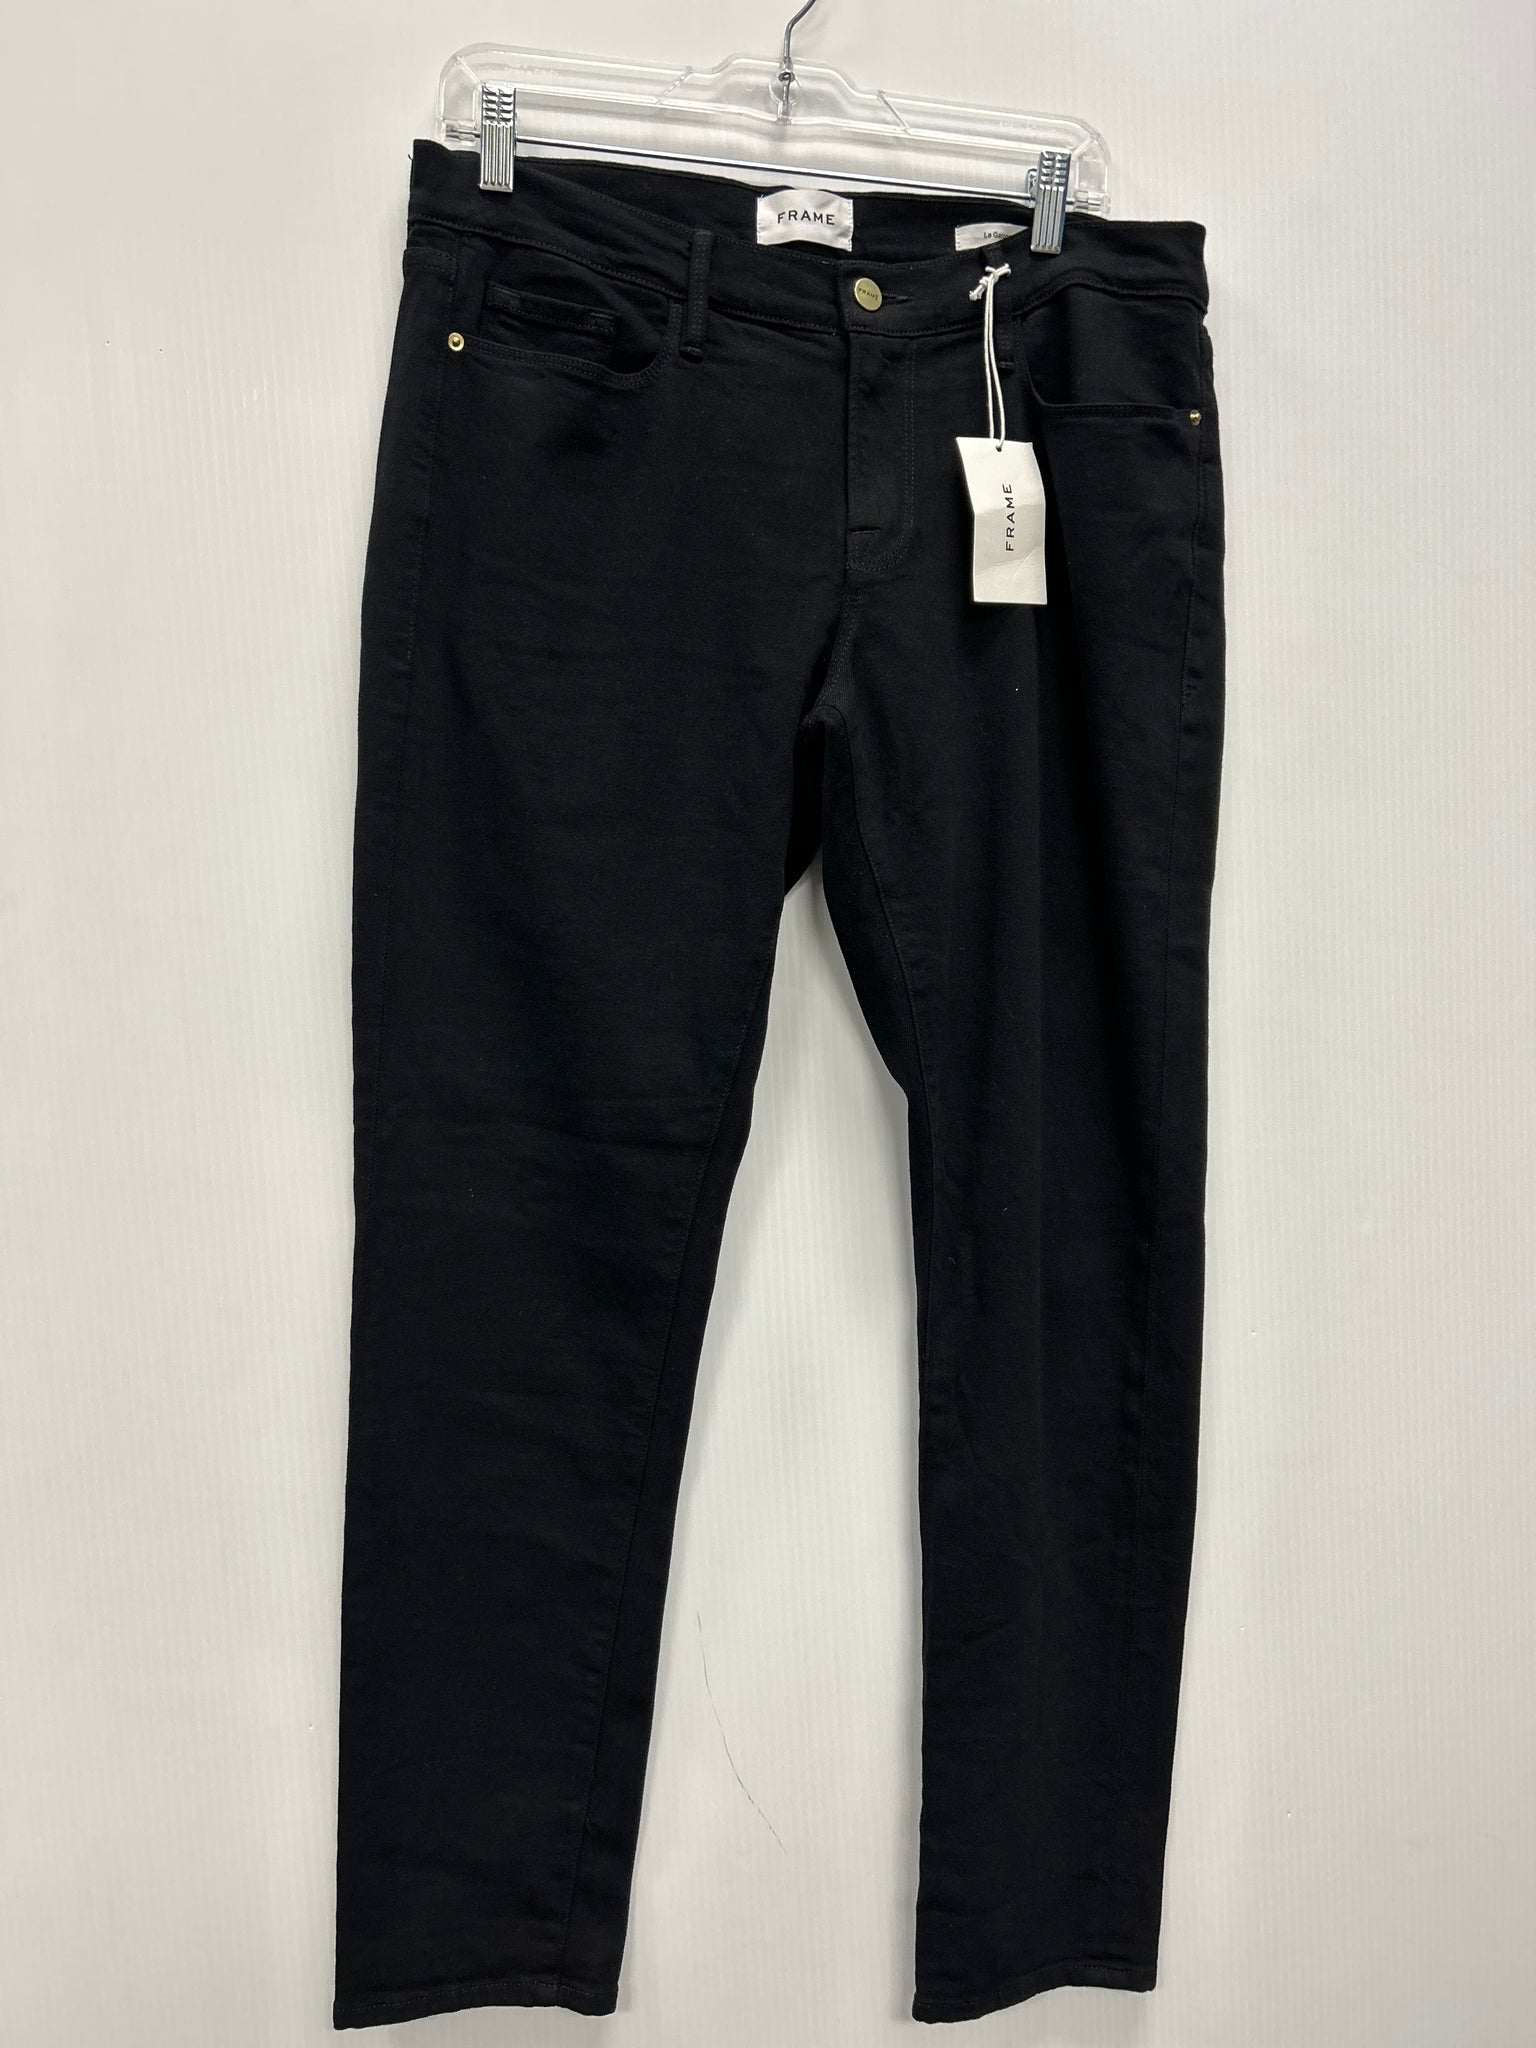 **NEW** Size 29 FRAME Jeans #0059